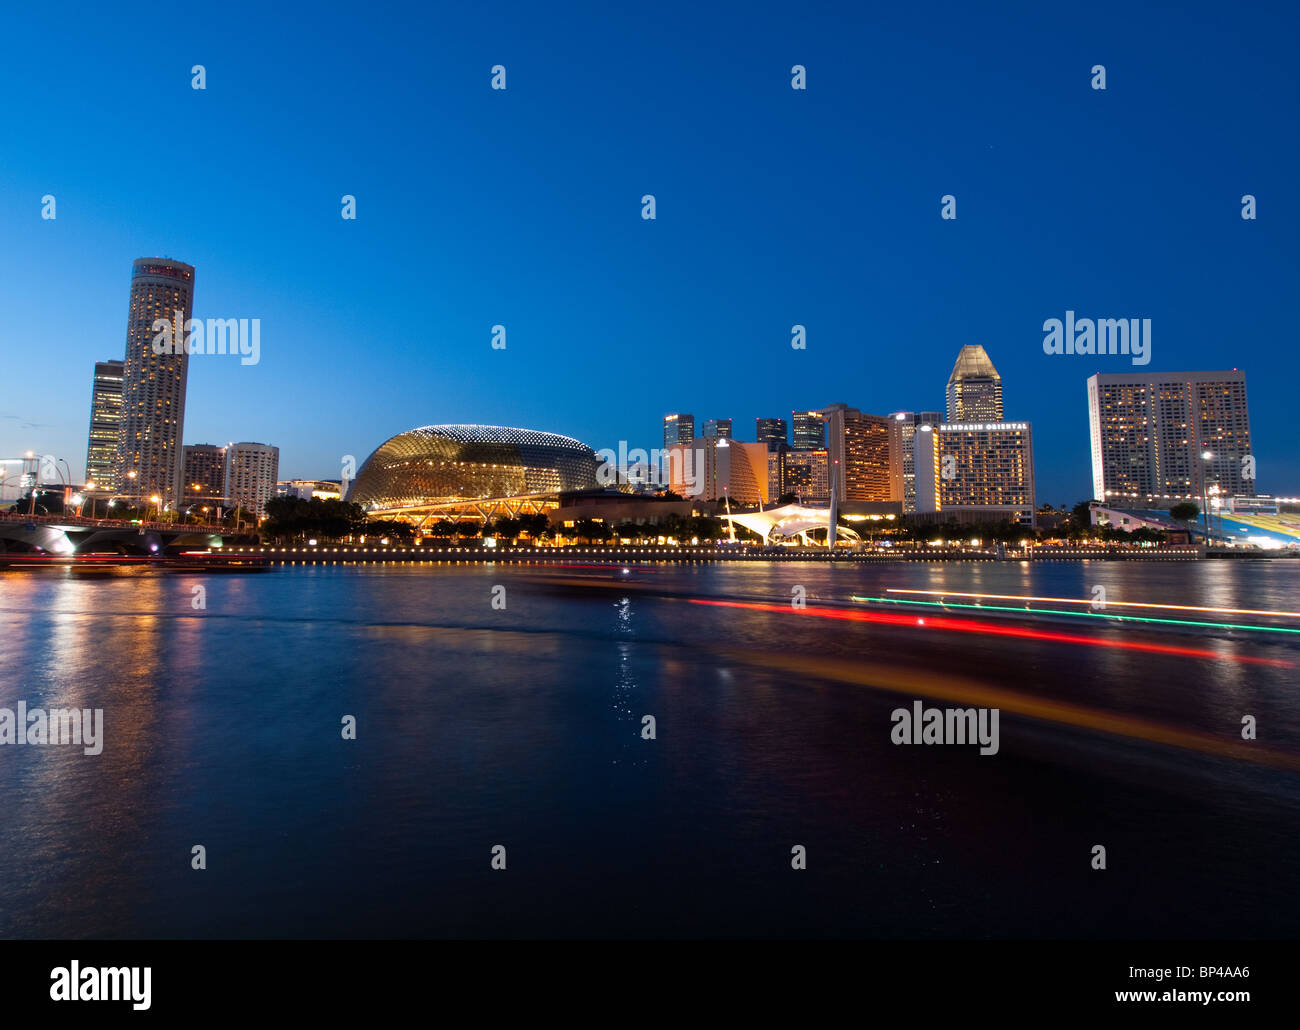 The beautiful Esplanade Singapore at night, with a ferry whizzing by. Stock Photo